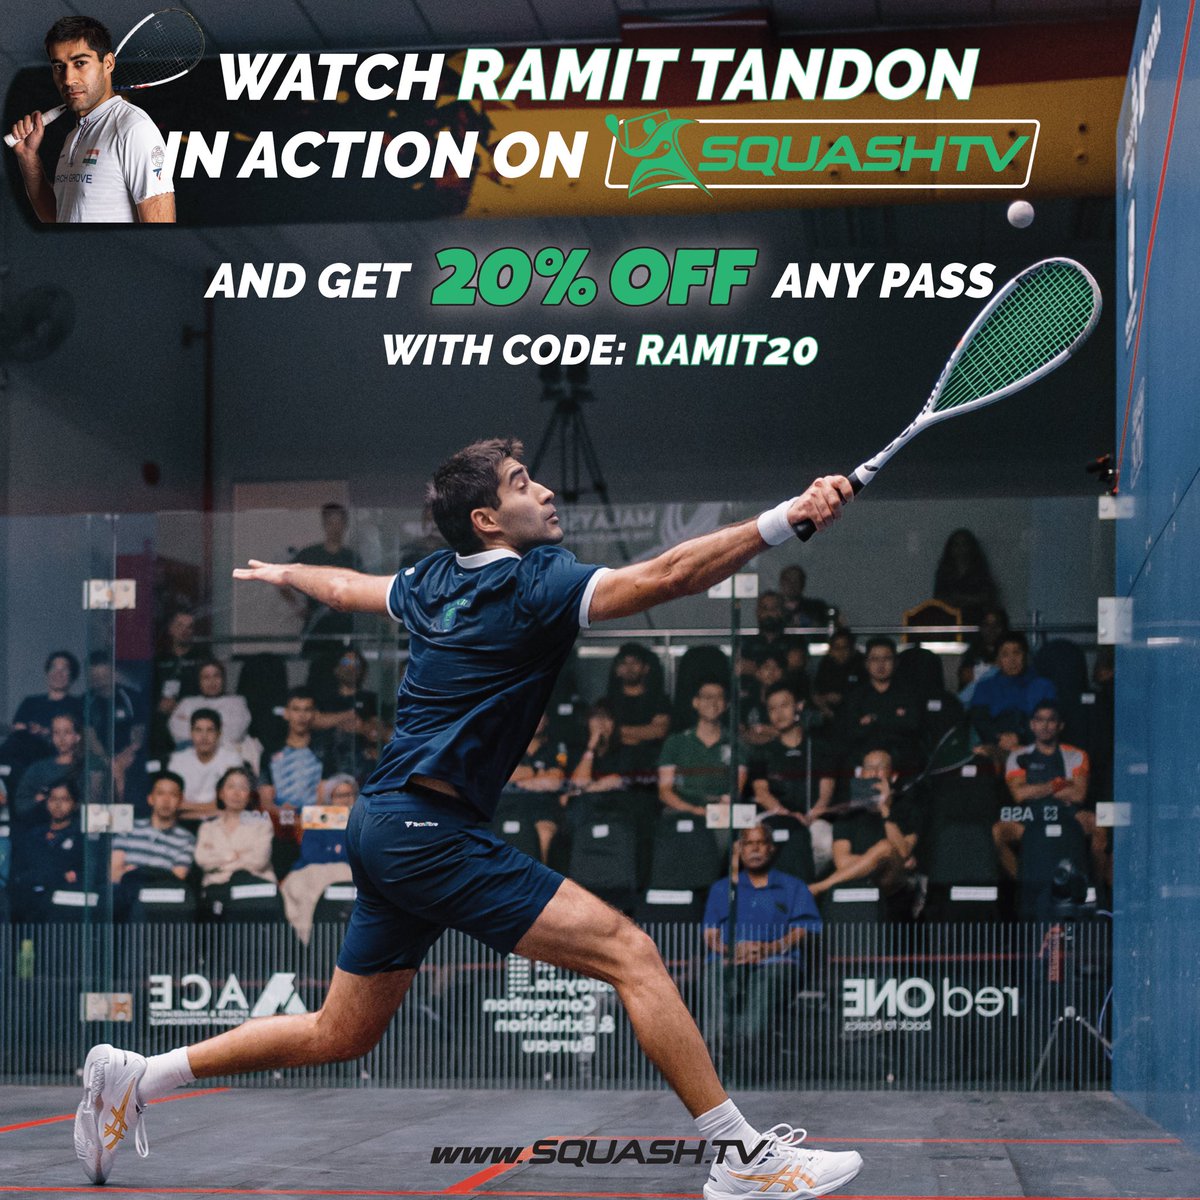 Join #Squash 📺, use the code below and get 20% off! 
Link: lddy.no/1jn9c
@SquashTV